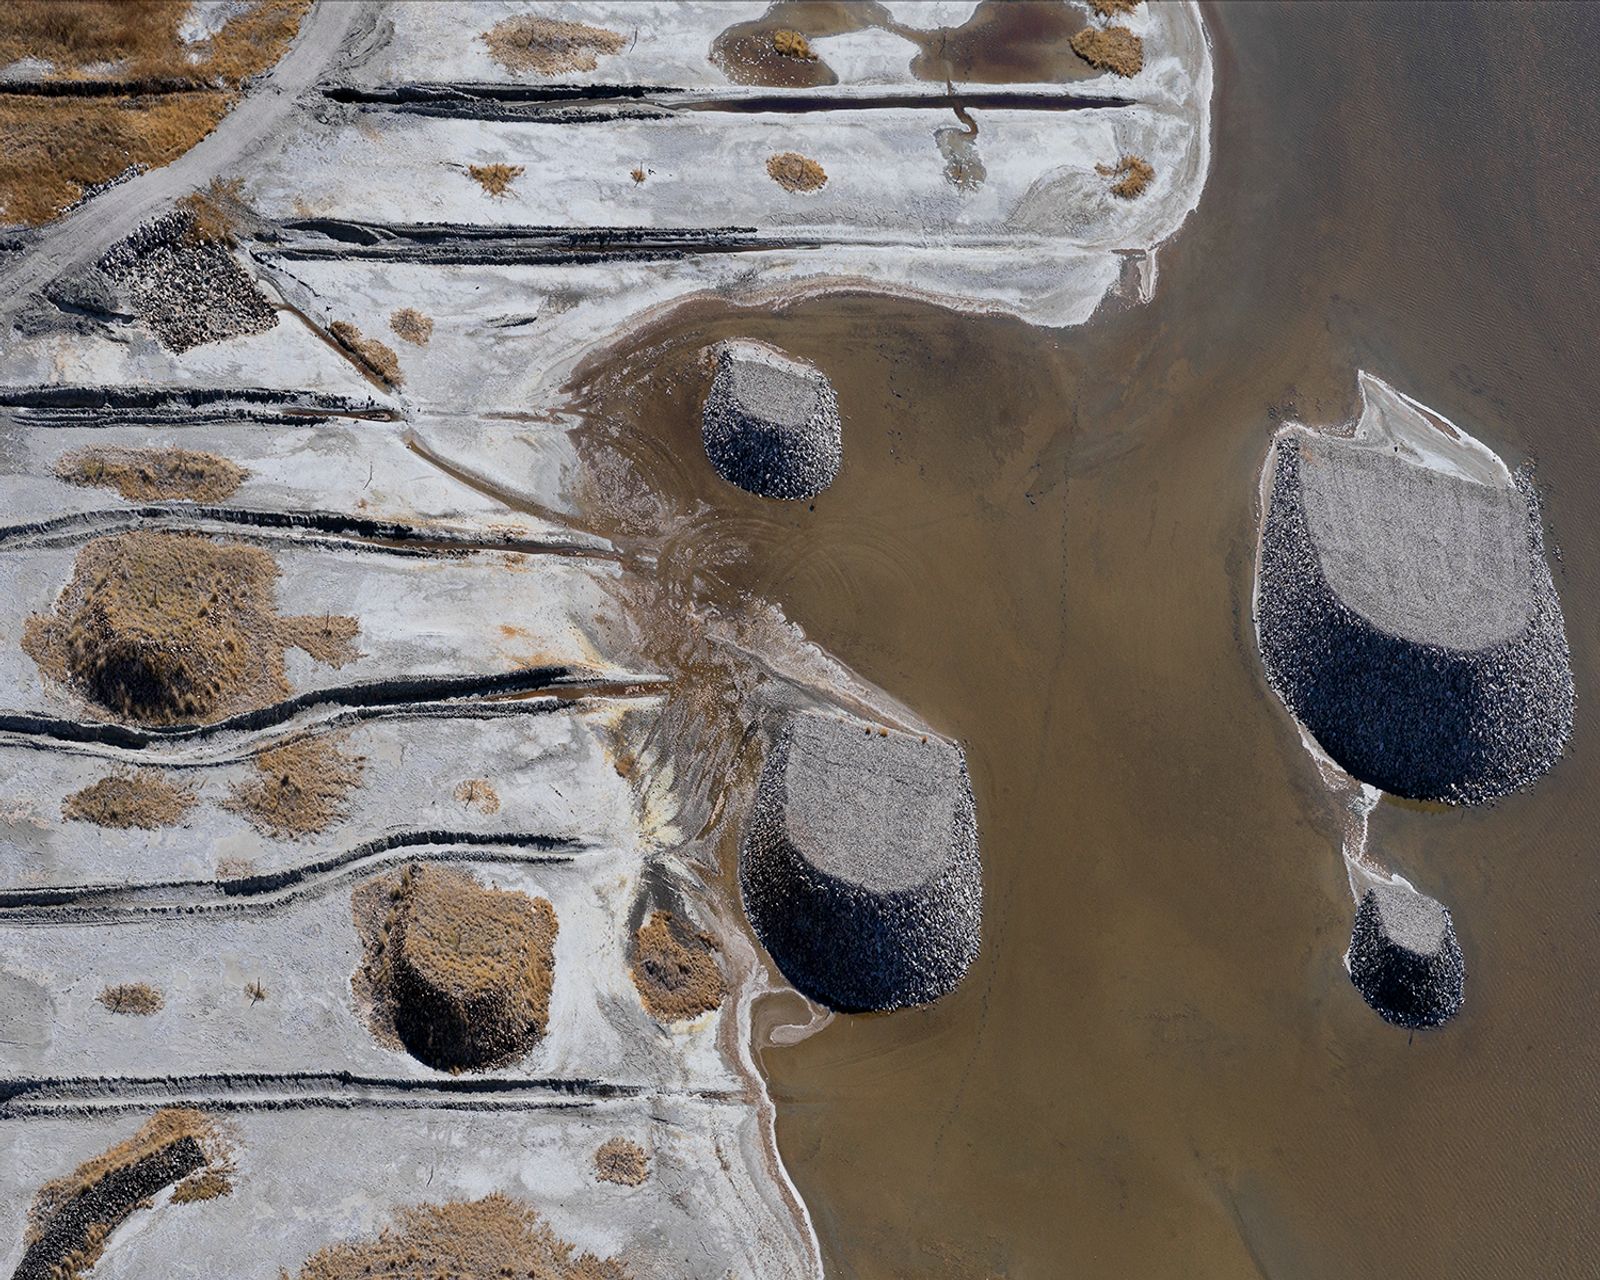 © BRAD TEMKIN - "Trenches and Mounds – Owens Lake, CA 2021"